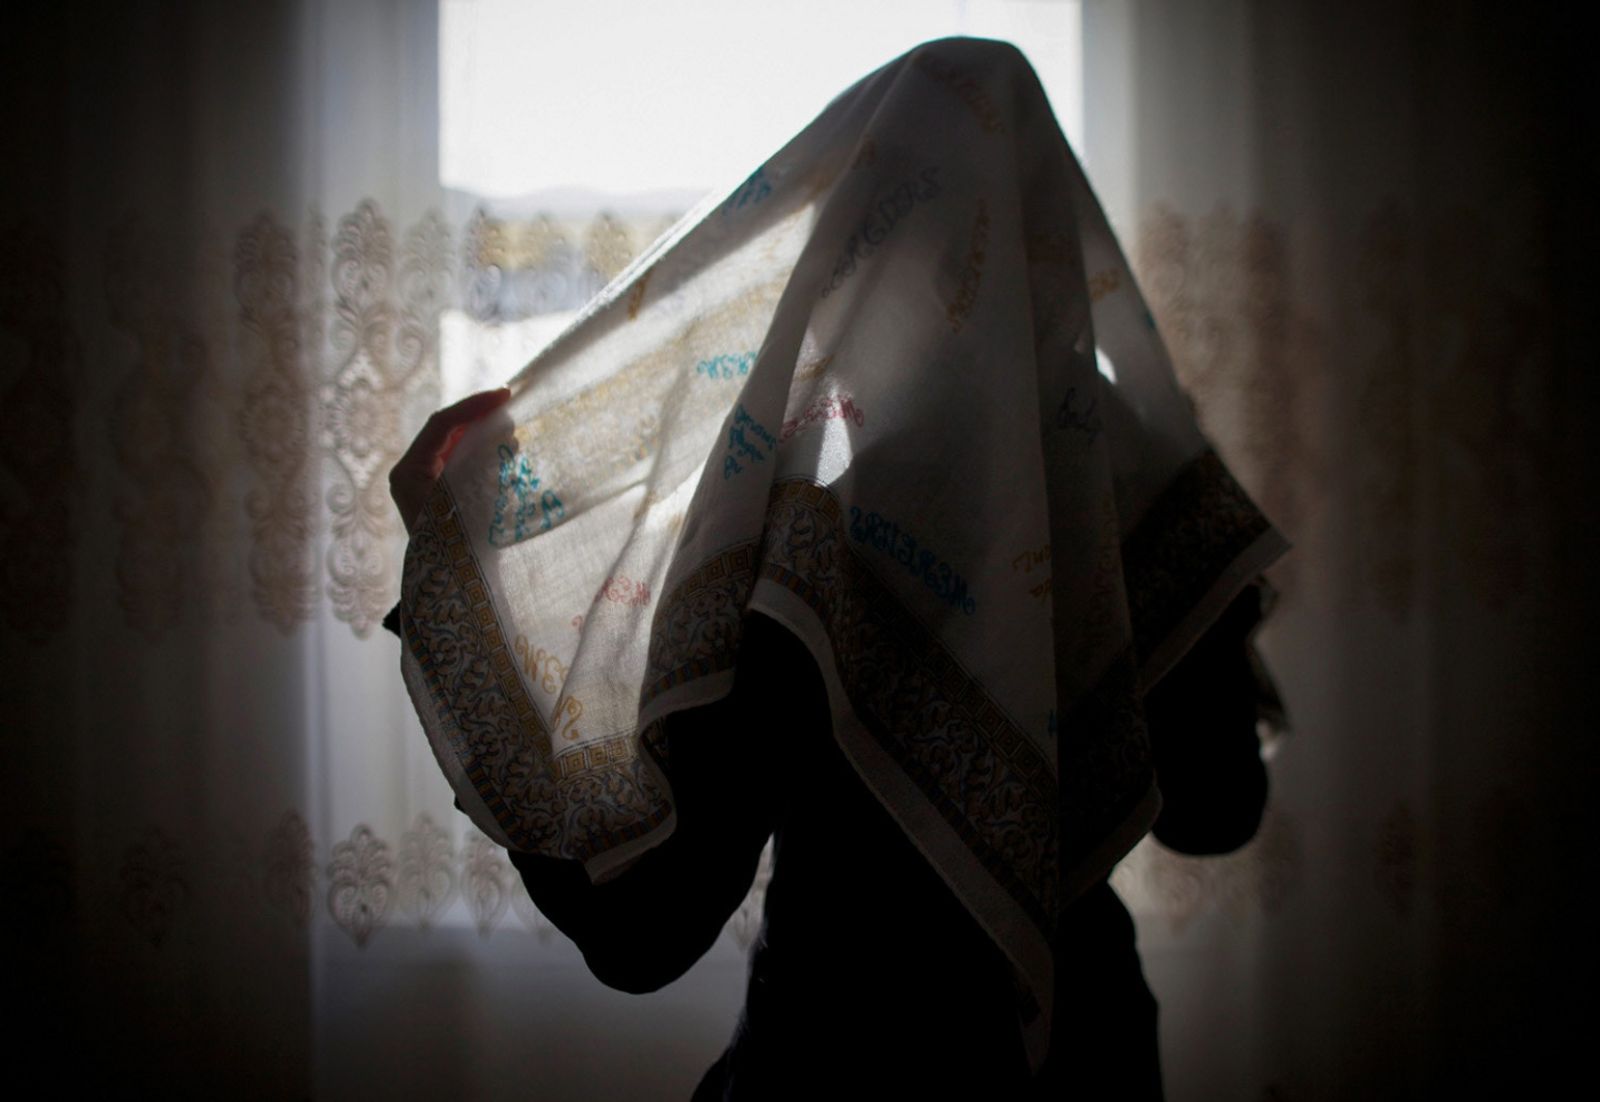 © Diana Markosian, winner of the PHM 2013 Grant New Generation Prize